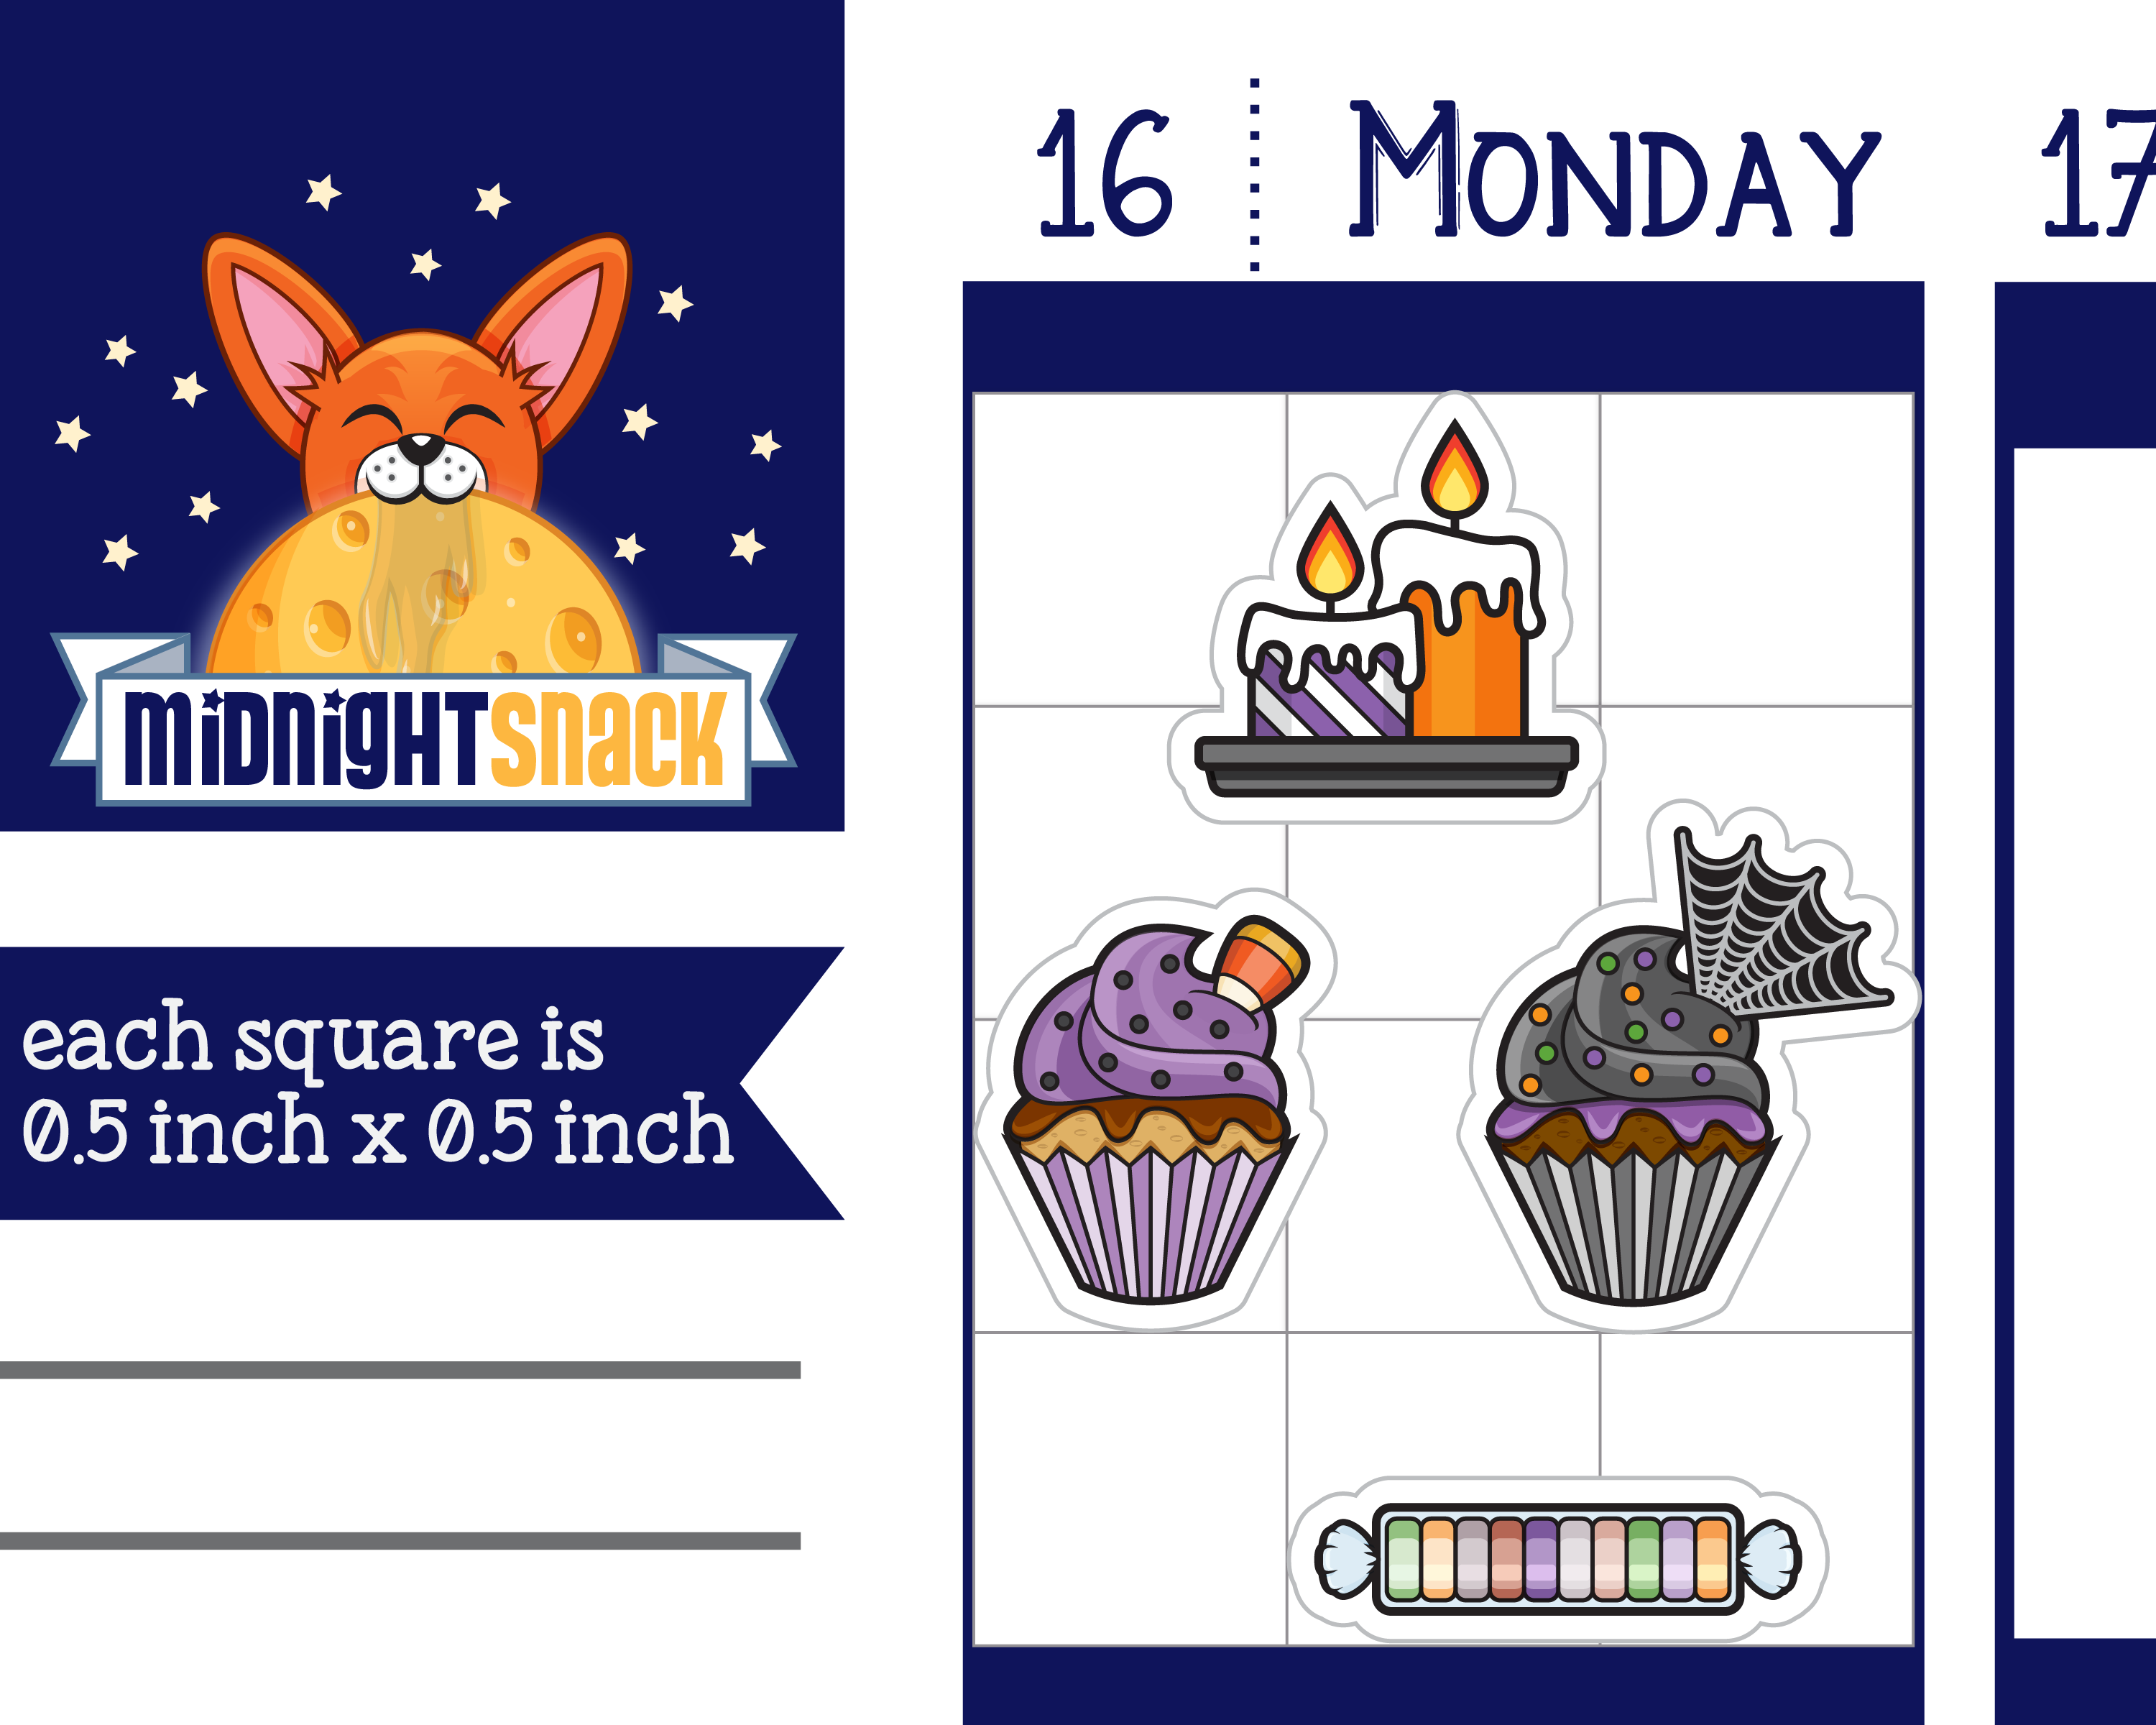 Halloween Sampler: Spooky Planner Stickers from Midnight Snack Planner. Featuring a close up and sizing information of Halloween cupcakes, candy and candles. 